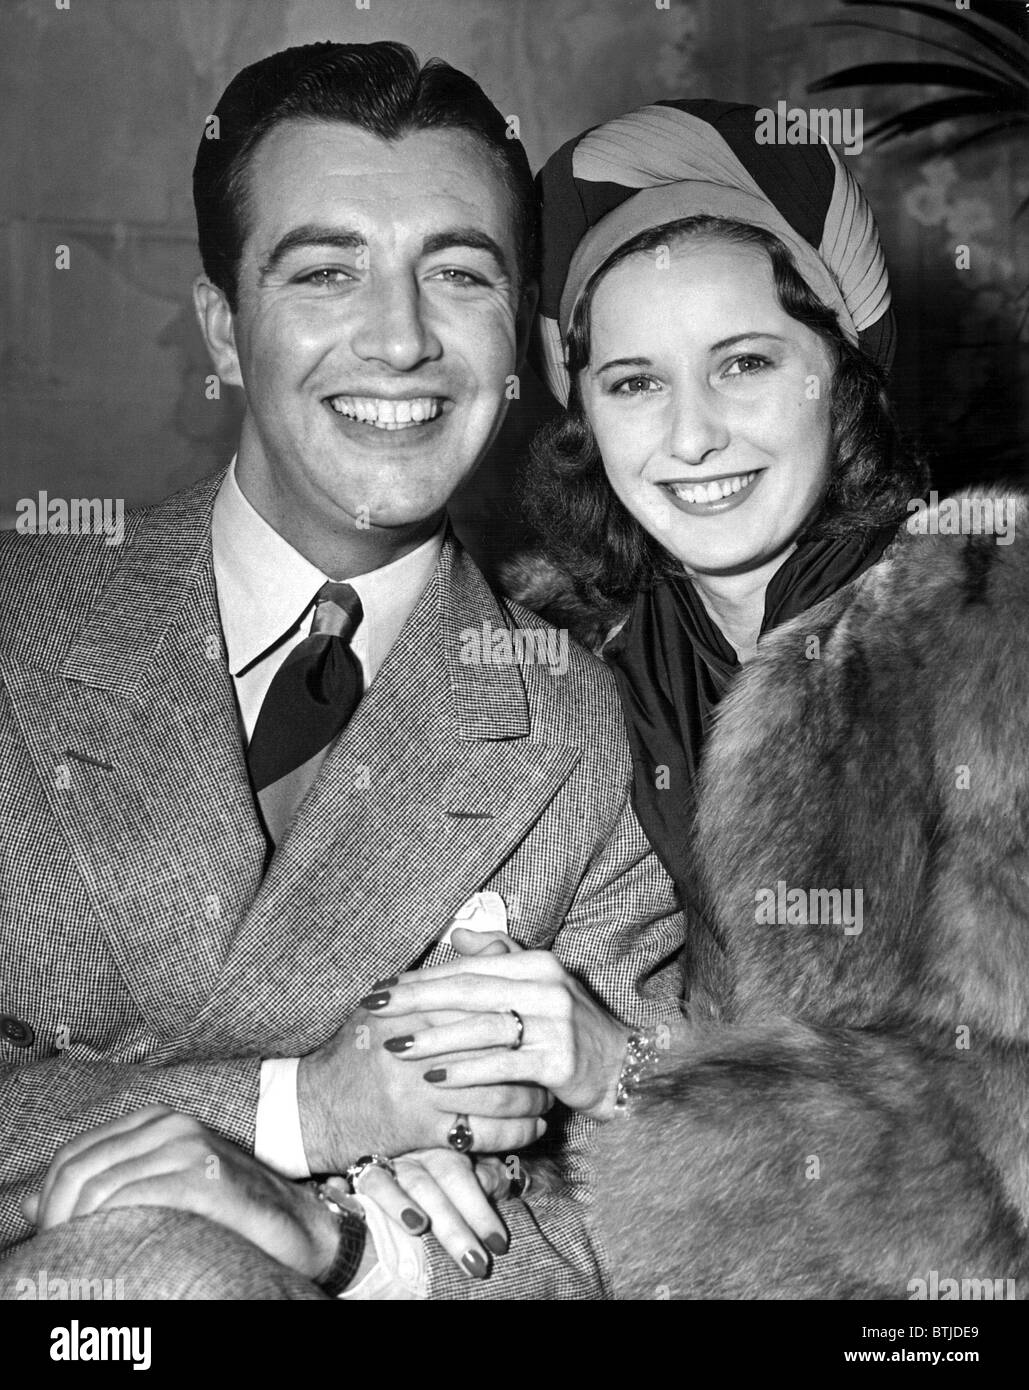 BARBARA STANWYCK AND ROBERT TAYLOR WED IN SURPRISE ELOPEMENT  BEVERLY HILLS, CALIF., 5/14/39. Stock Photo